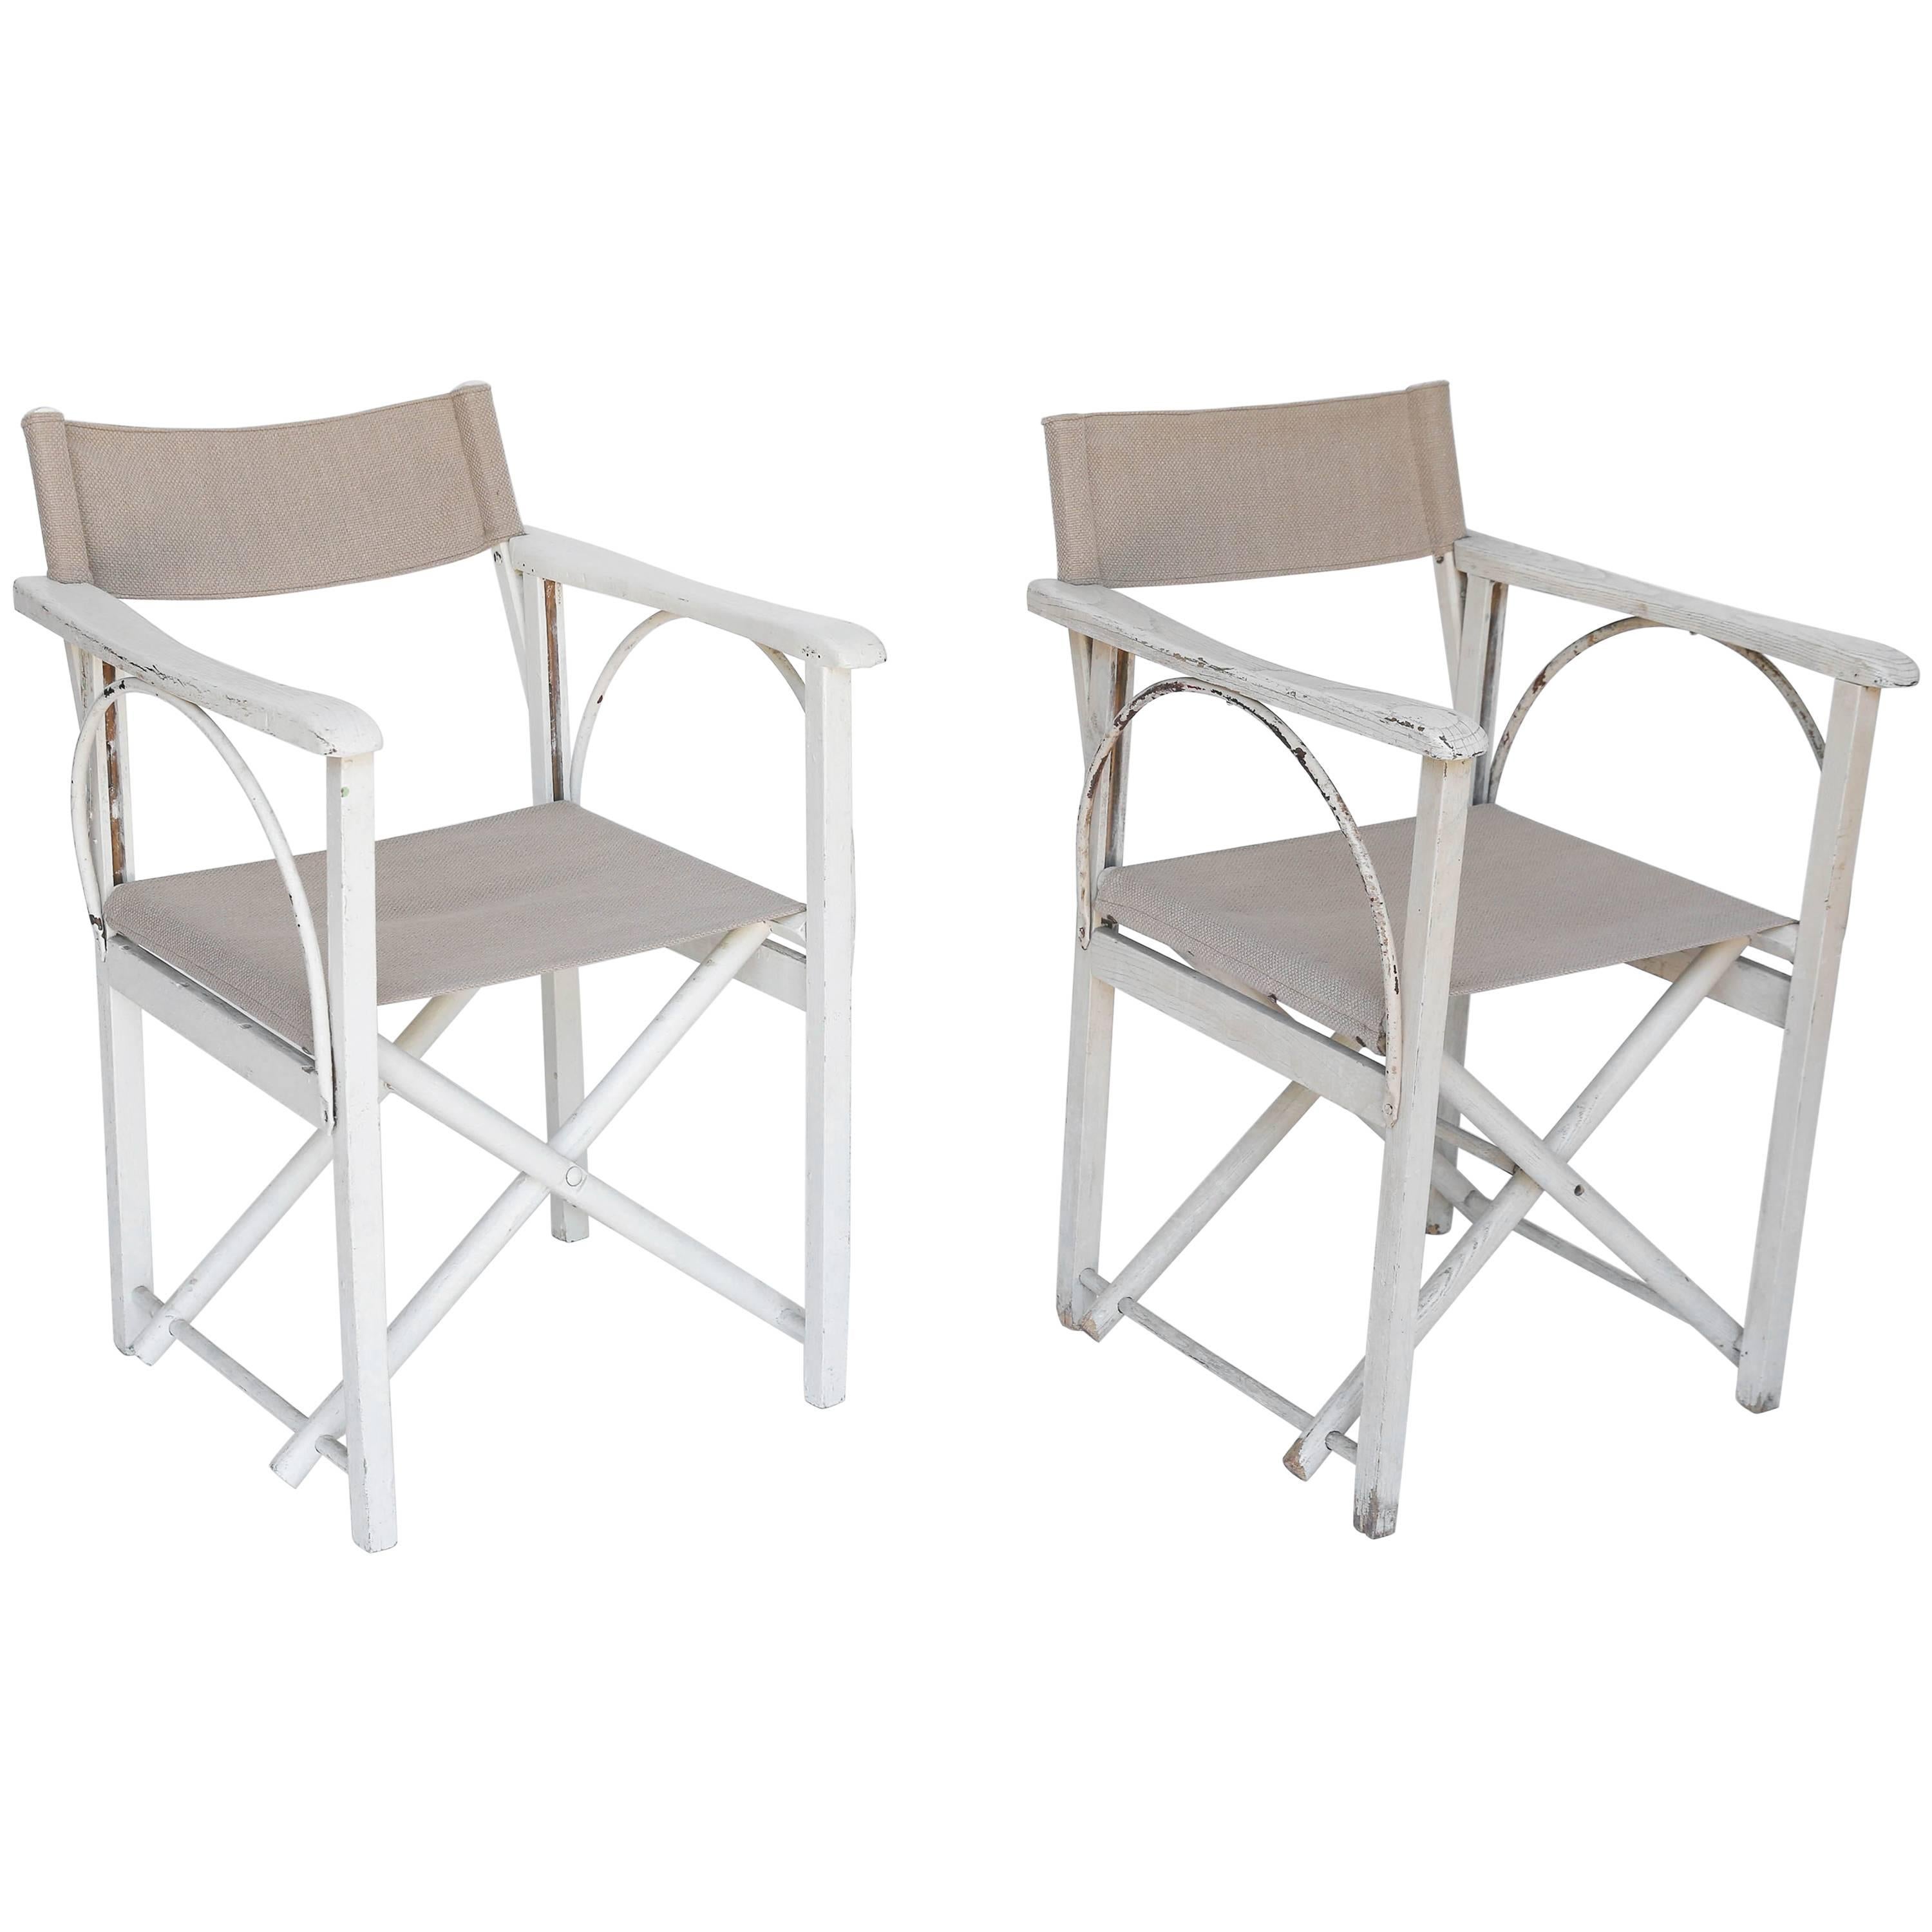 Pair of French Folding Chairs